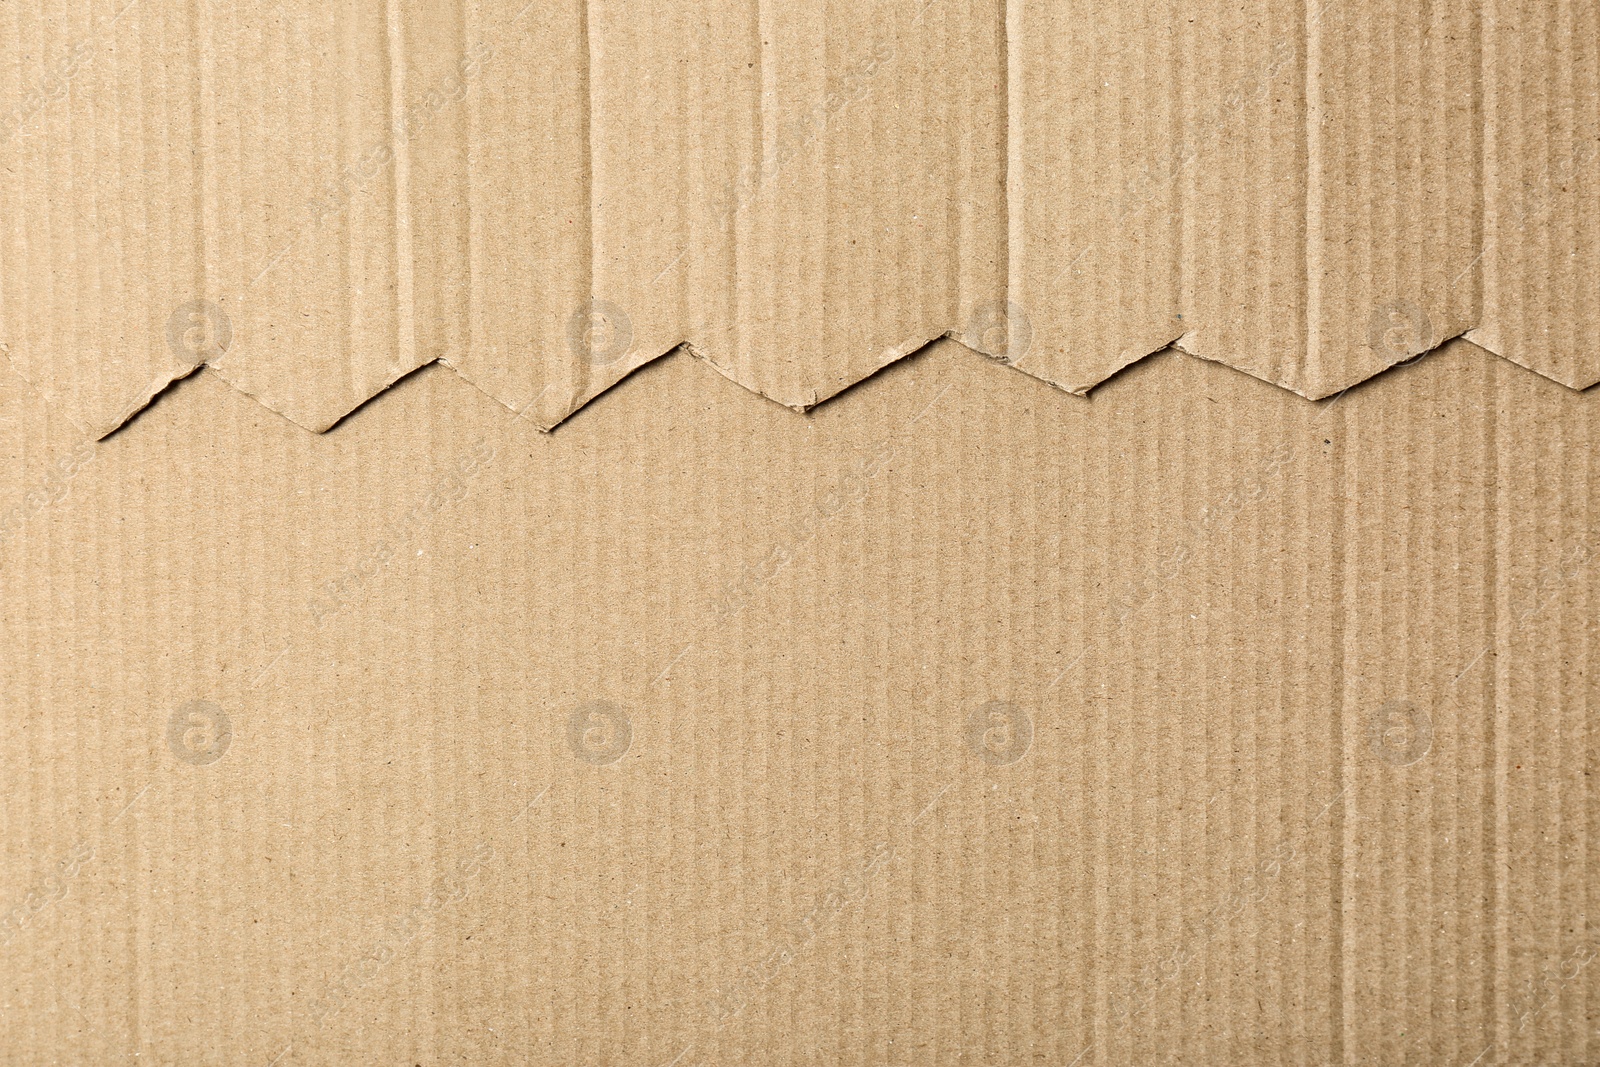 Photo of Cardboard surface as background, top view. Recyclable material